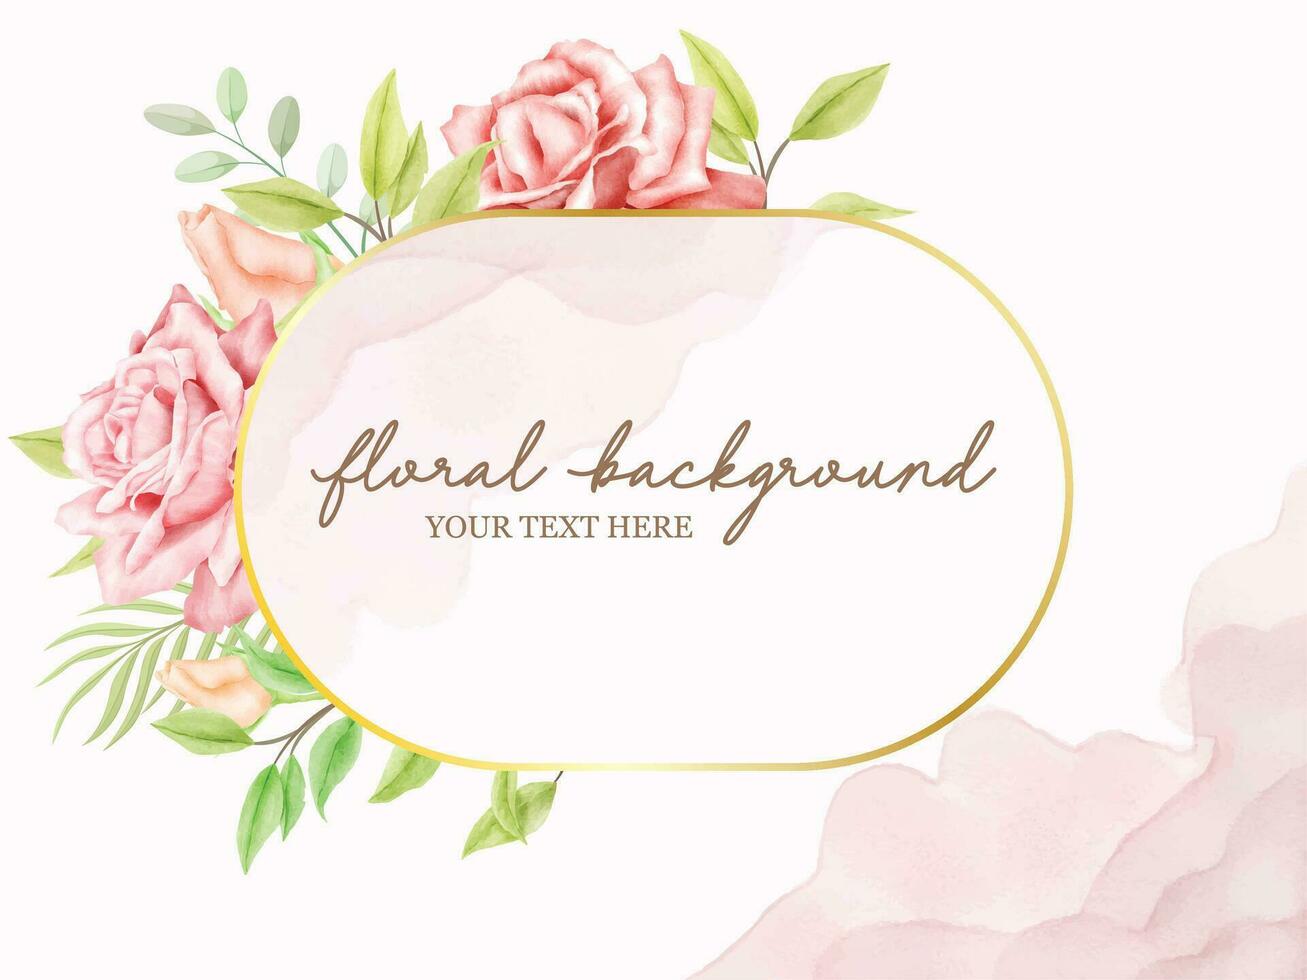 Floral Wedding Banner Background Template vector